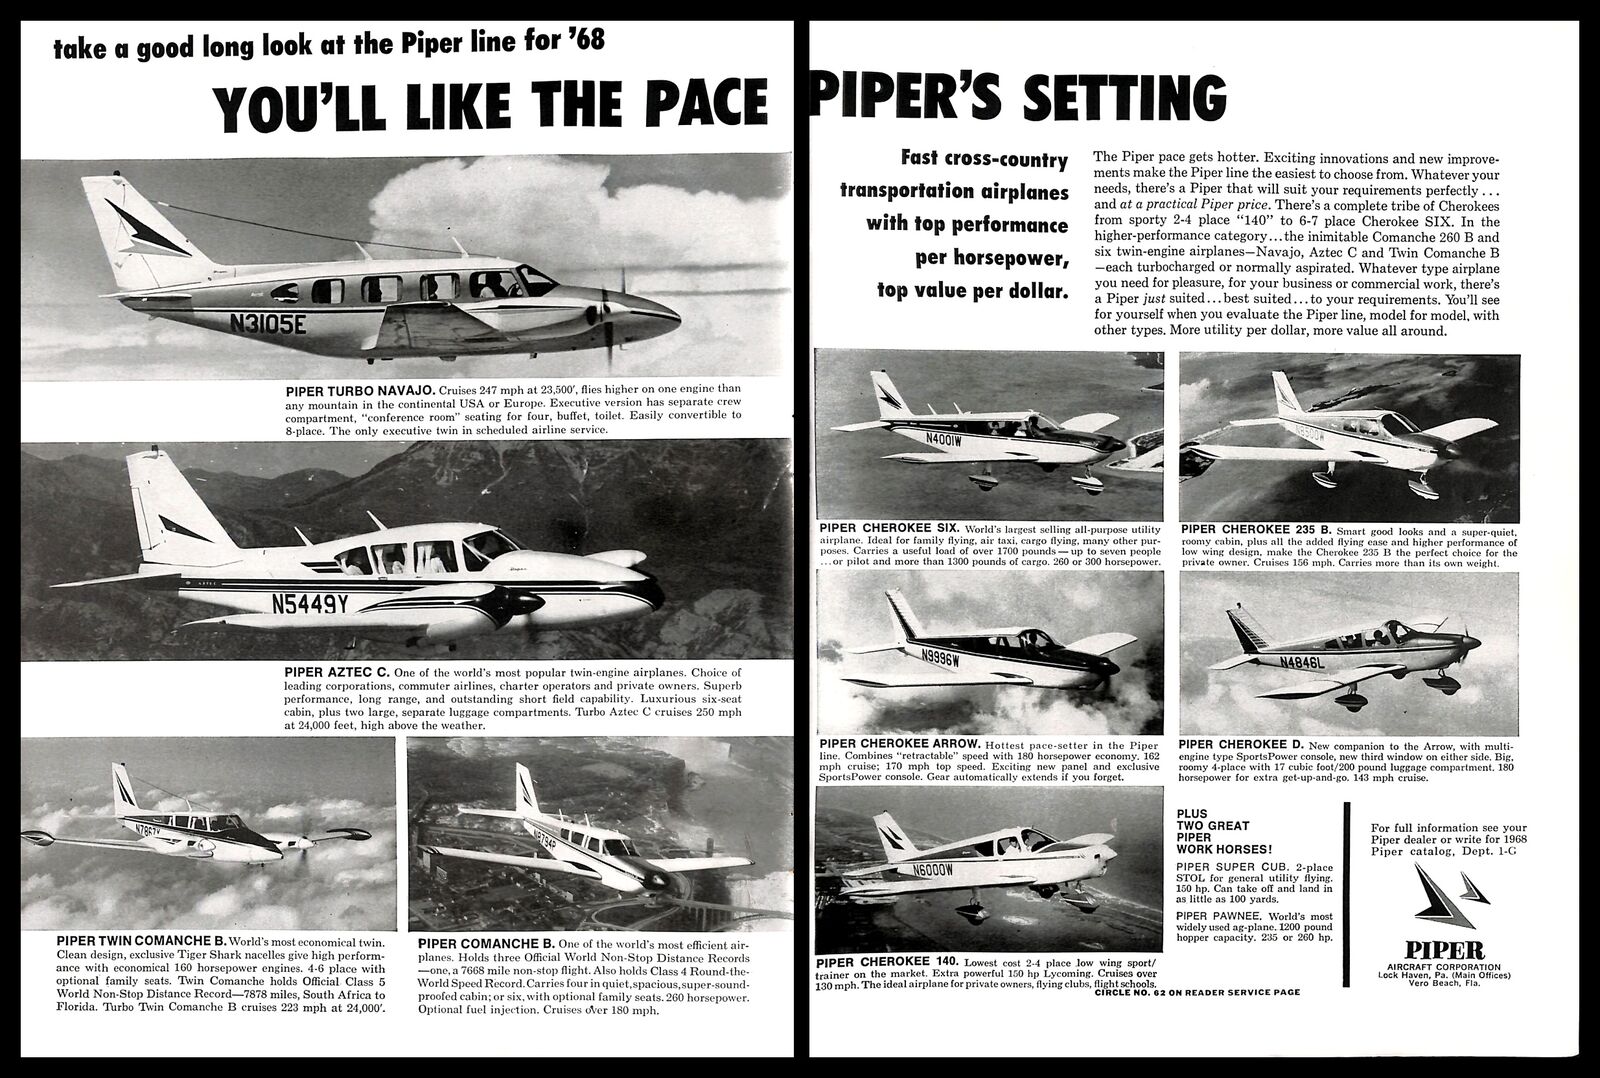 1968 Piper Aircraft Corporation Vintage PRINT AD Aviation Airplanes Flying B&W